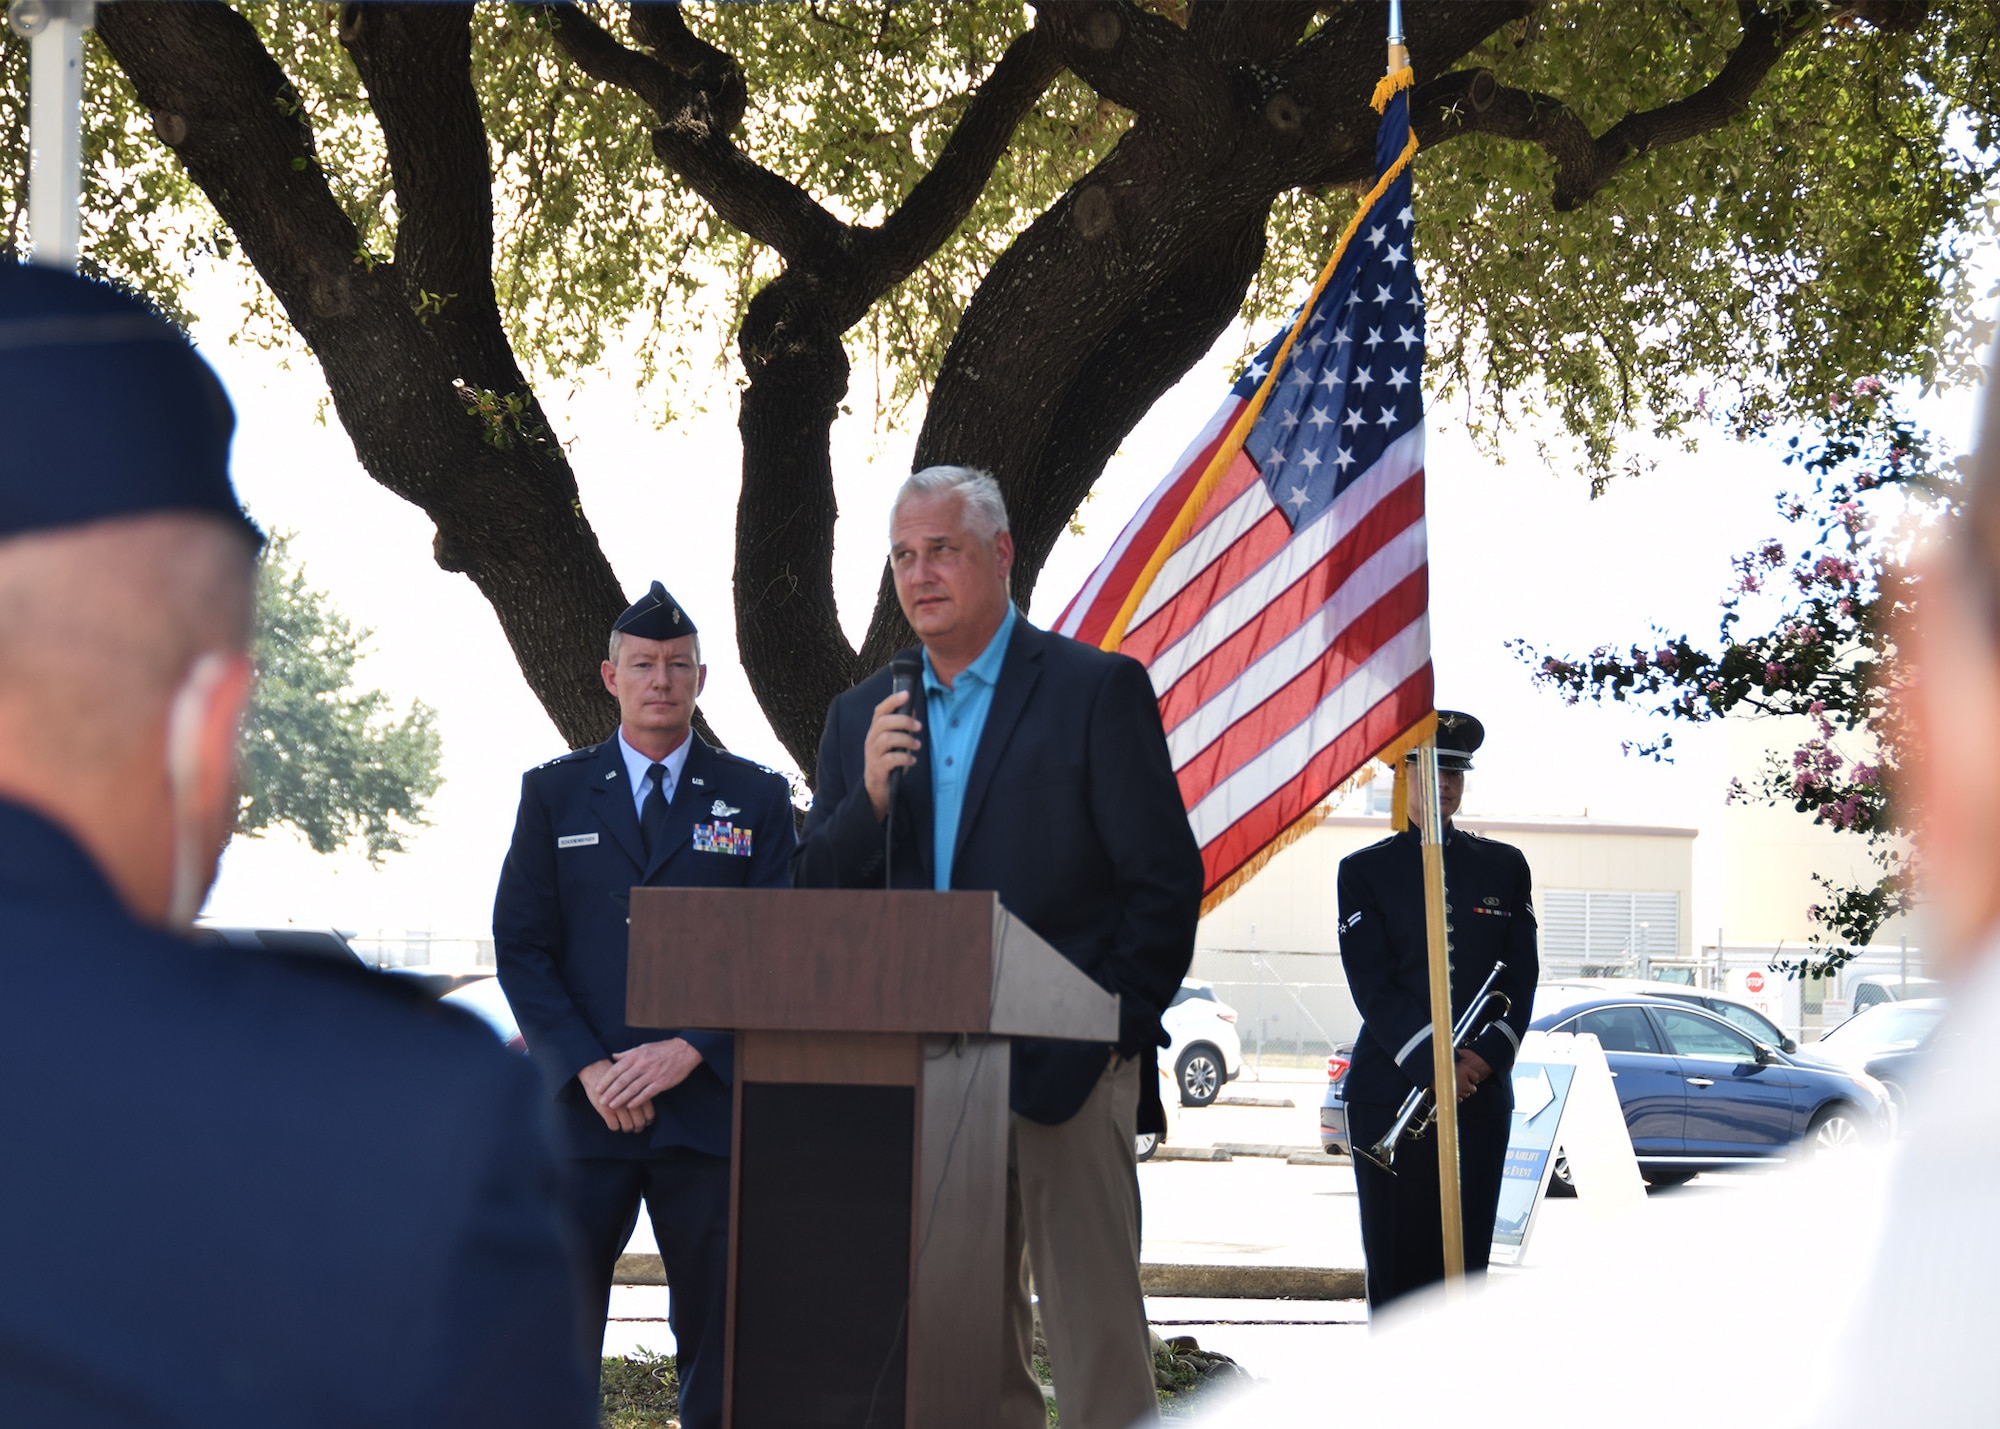 Retired Col. Jimmie Brooks speaks at the BRAVO-12 remembrance and wreath laying ceremony Aug. 28, 2020 at Joint Base San Antonio-Lackland, Texas.